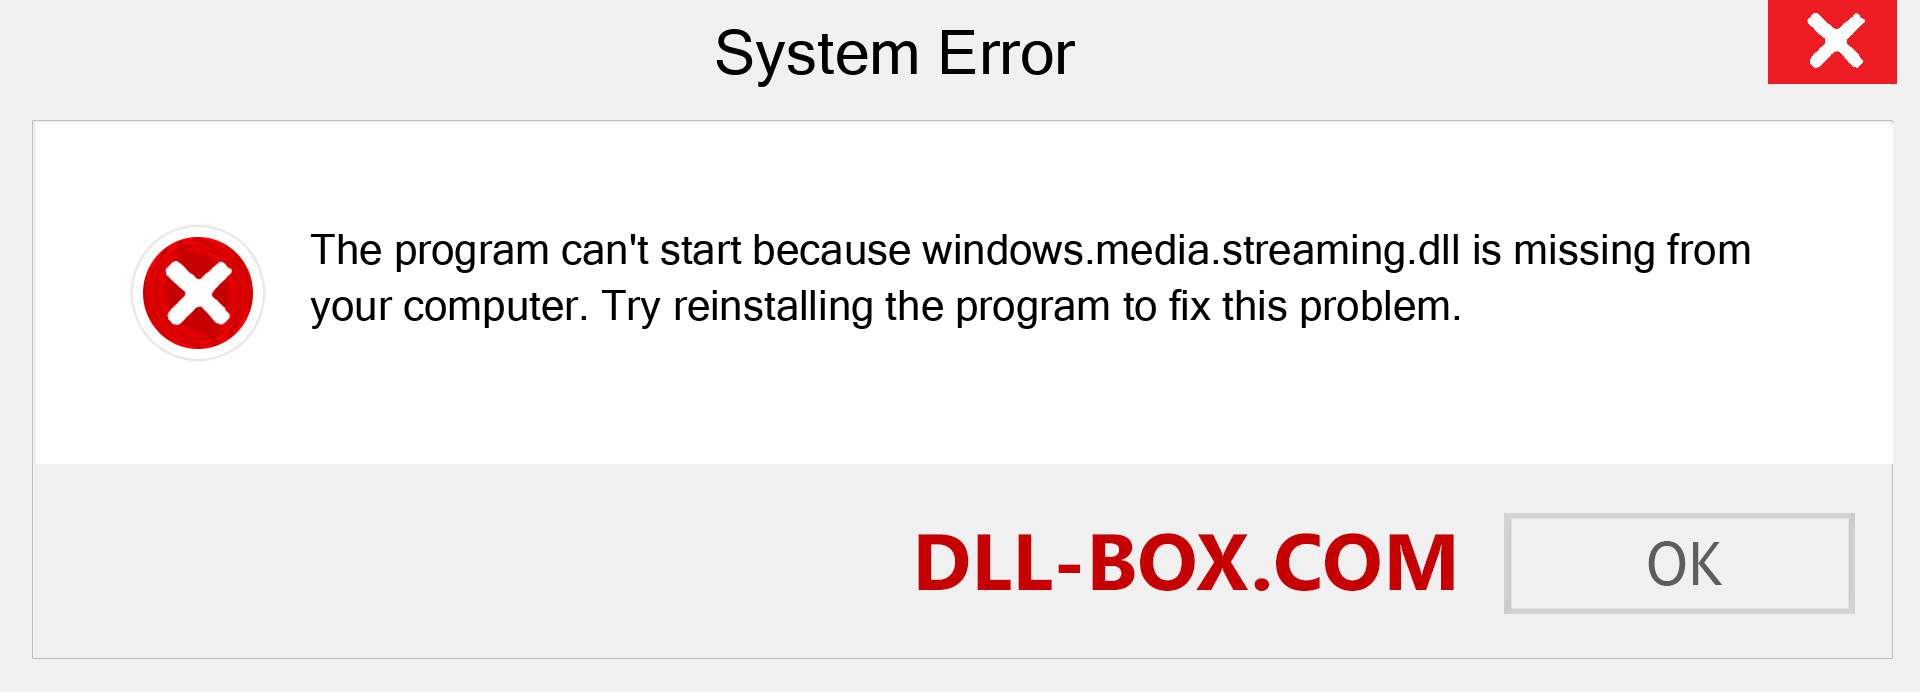  windows.media.streaming.dll file is missing?. Download for Windows 7, 8, 10 - Fix  windows.media.streaming dll Missing Error on Windows, photos, images